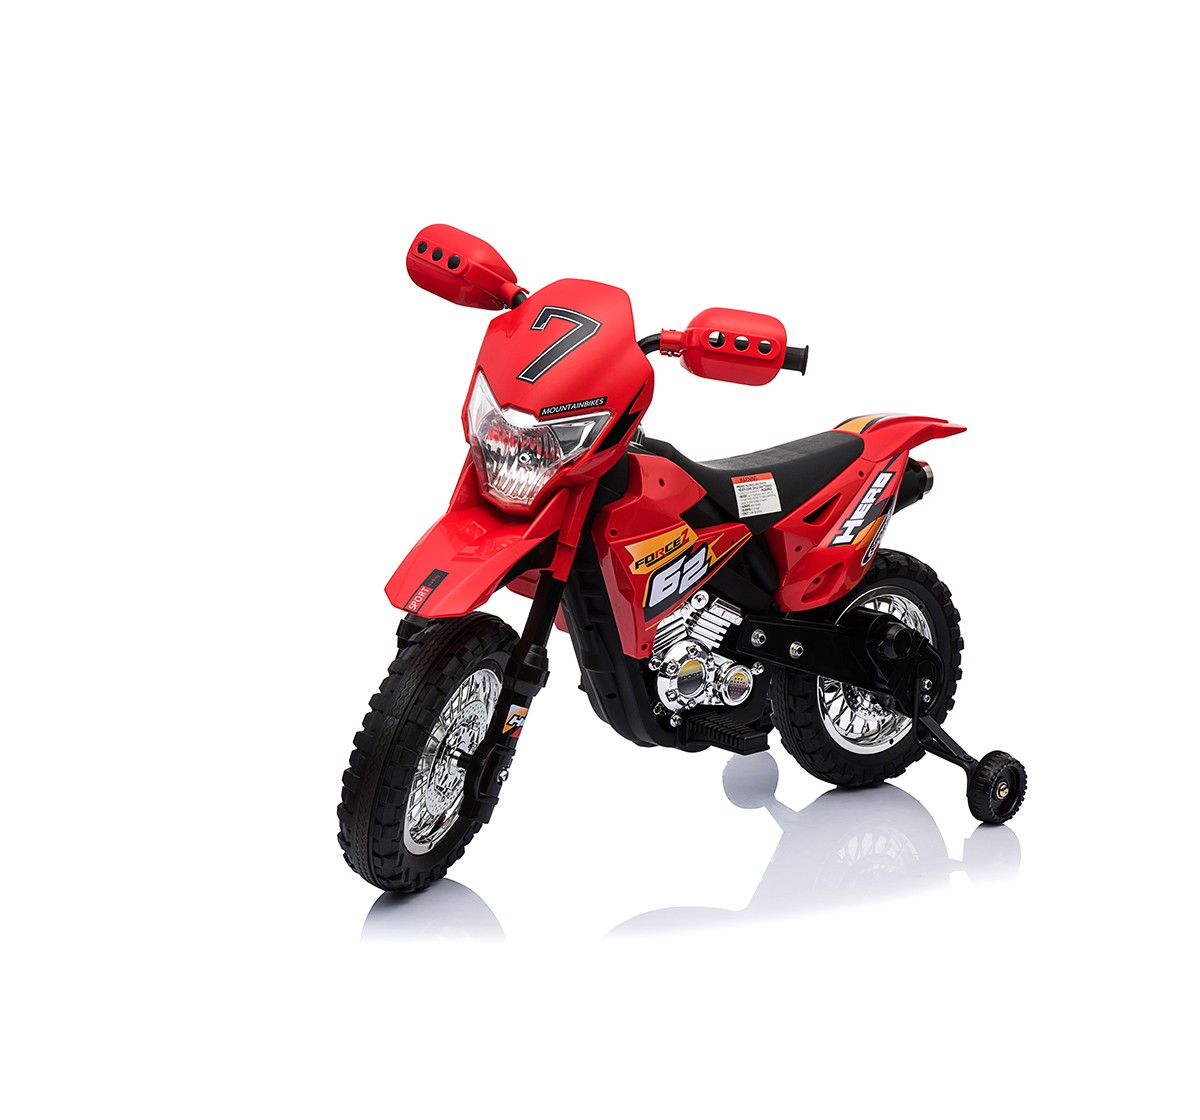 Bettyma 6 Volt Bike With Music And Light - Red Battery Operated Rideons for Kids age 3Y+ (Red)